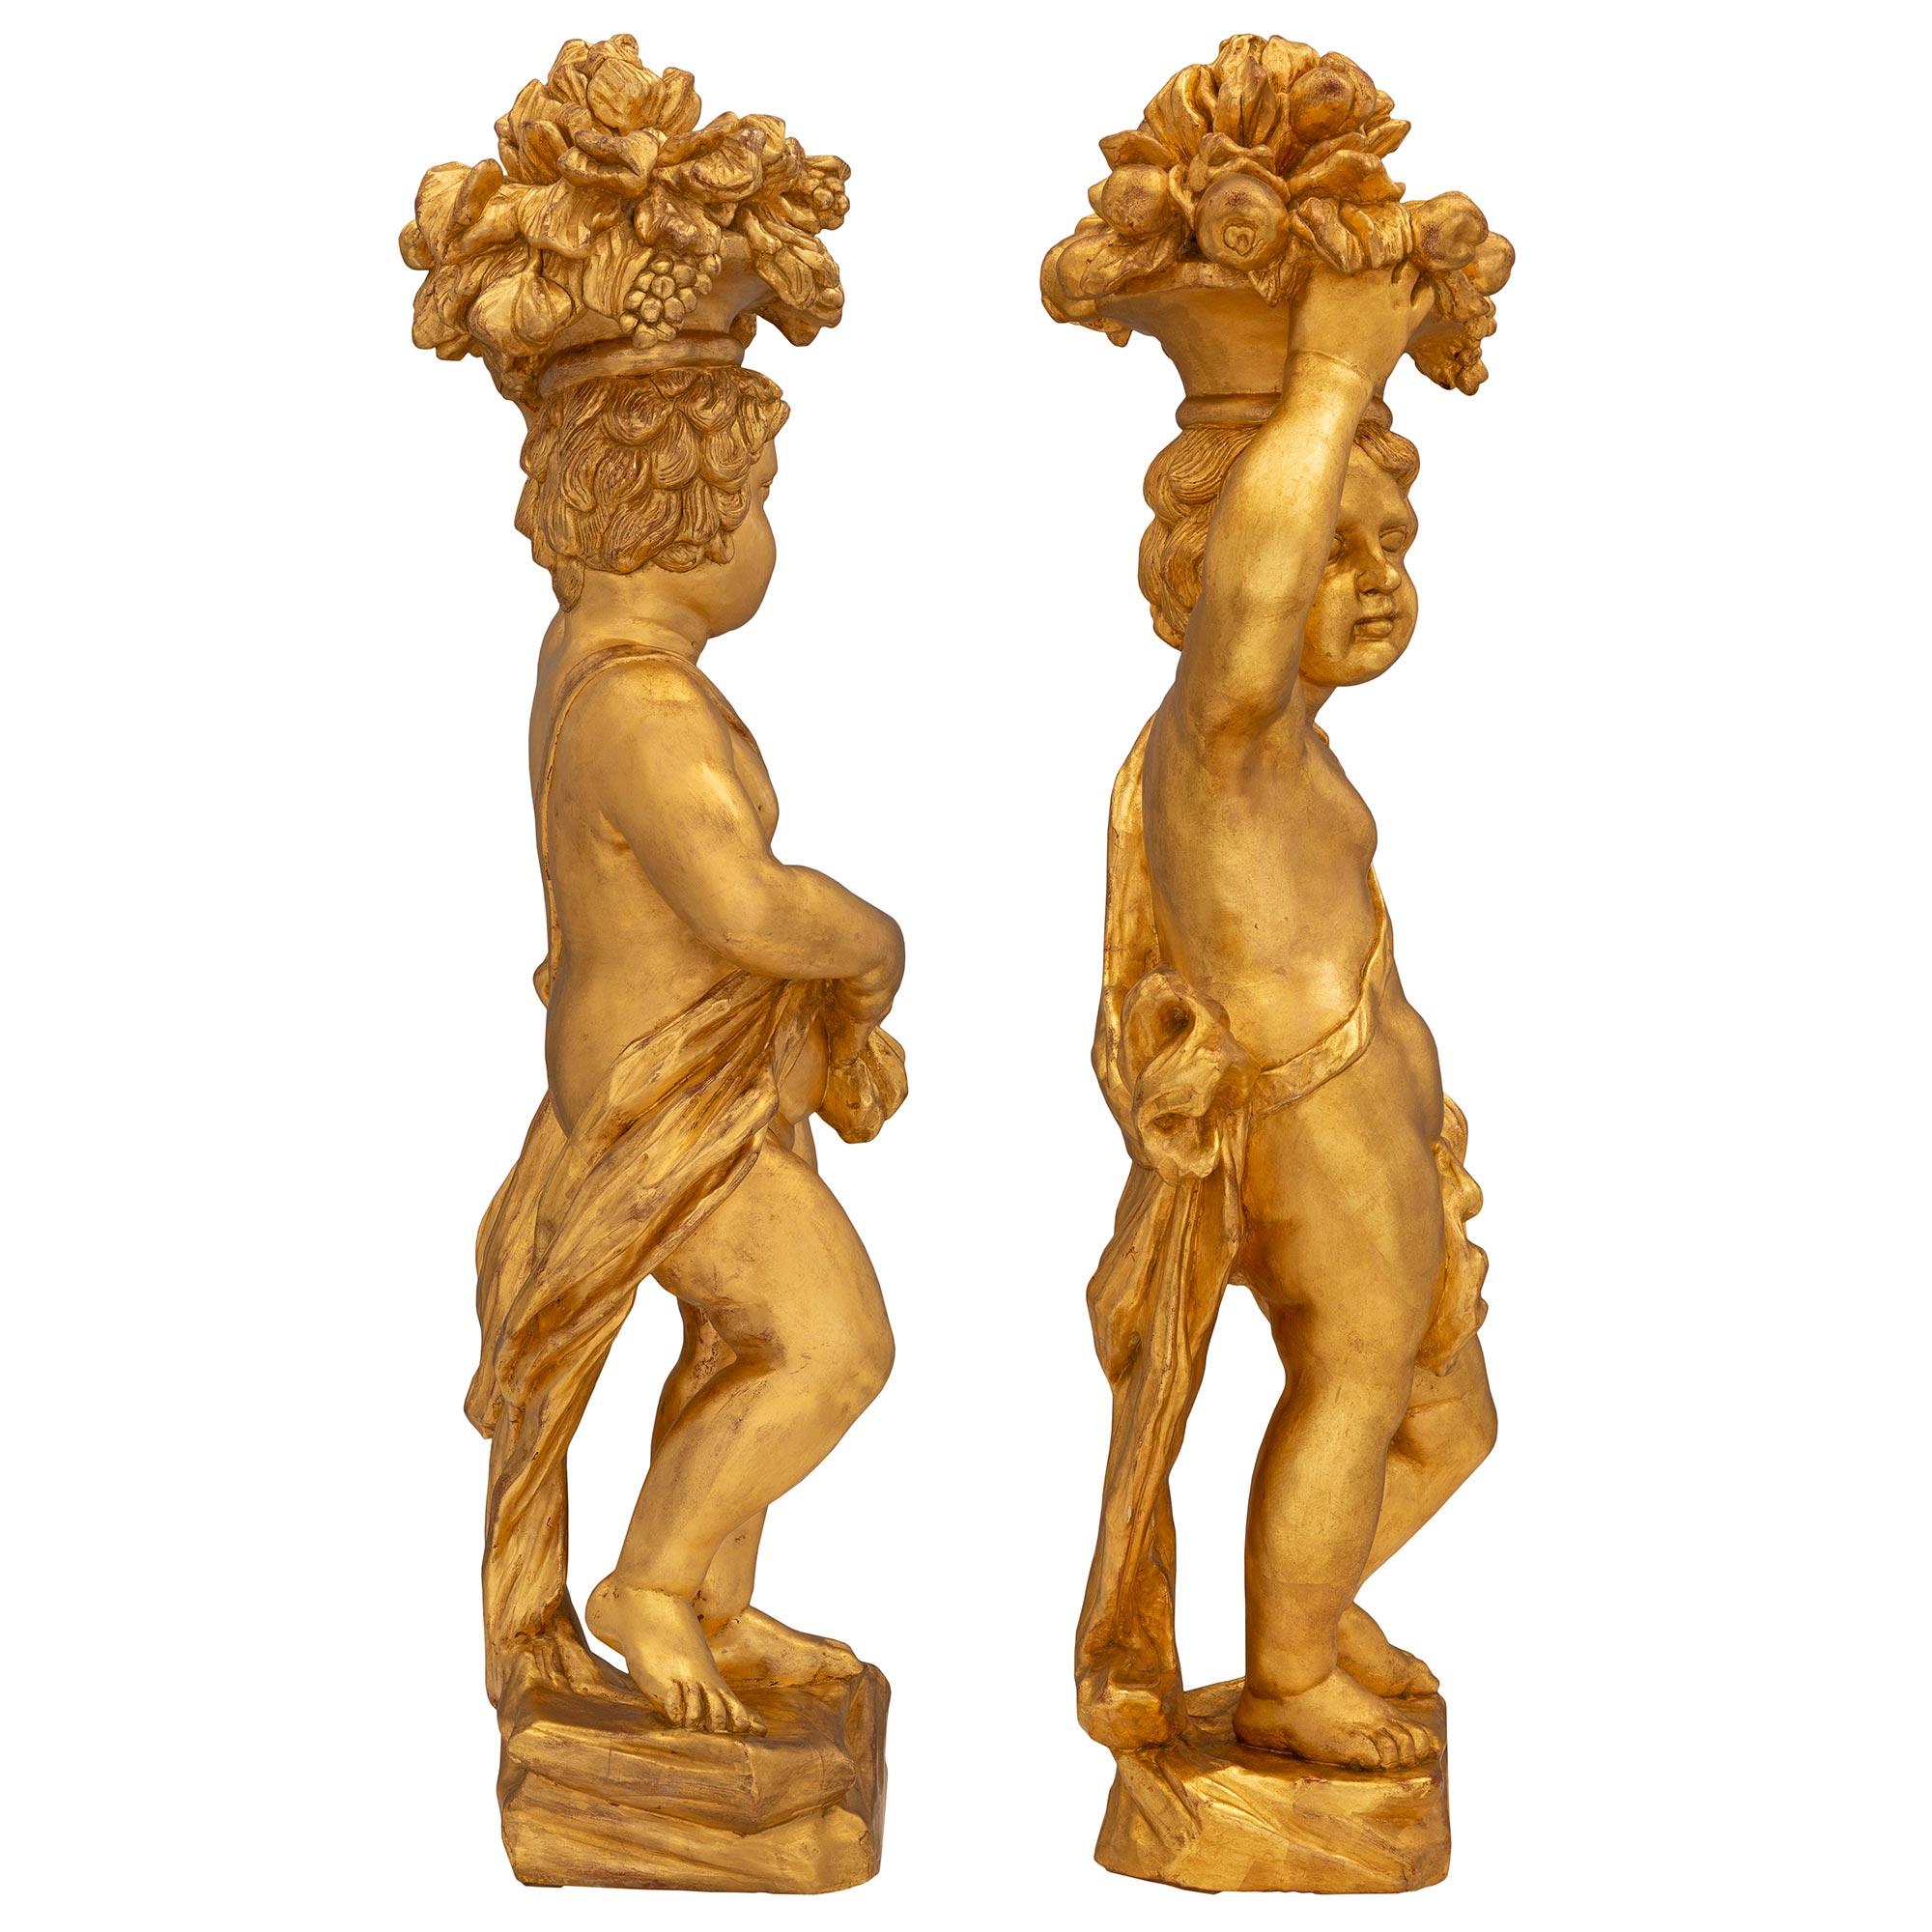 Pair of Italian 18th Century Baroque Period Giltwood Statues In Good Condition For Sale In West Palm Beach, FL